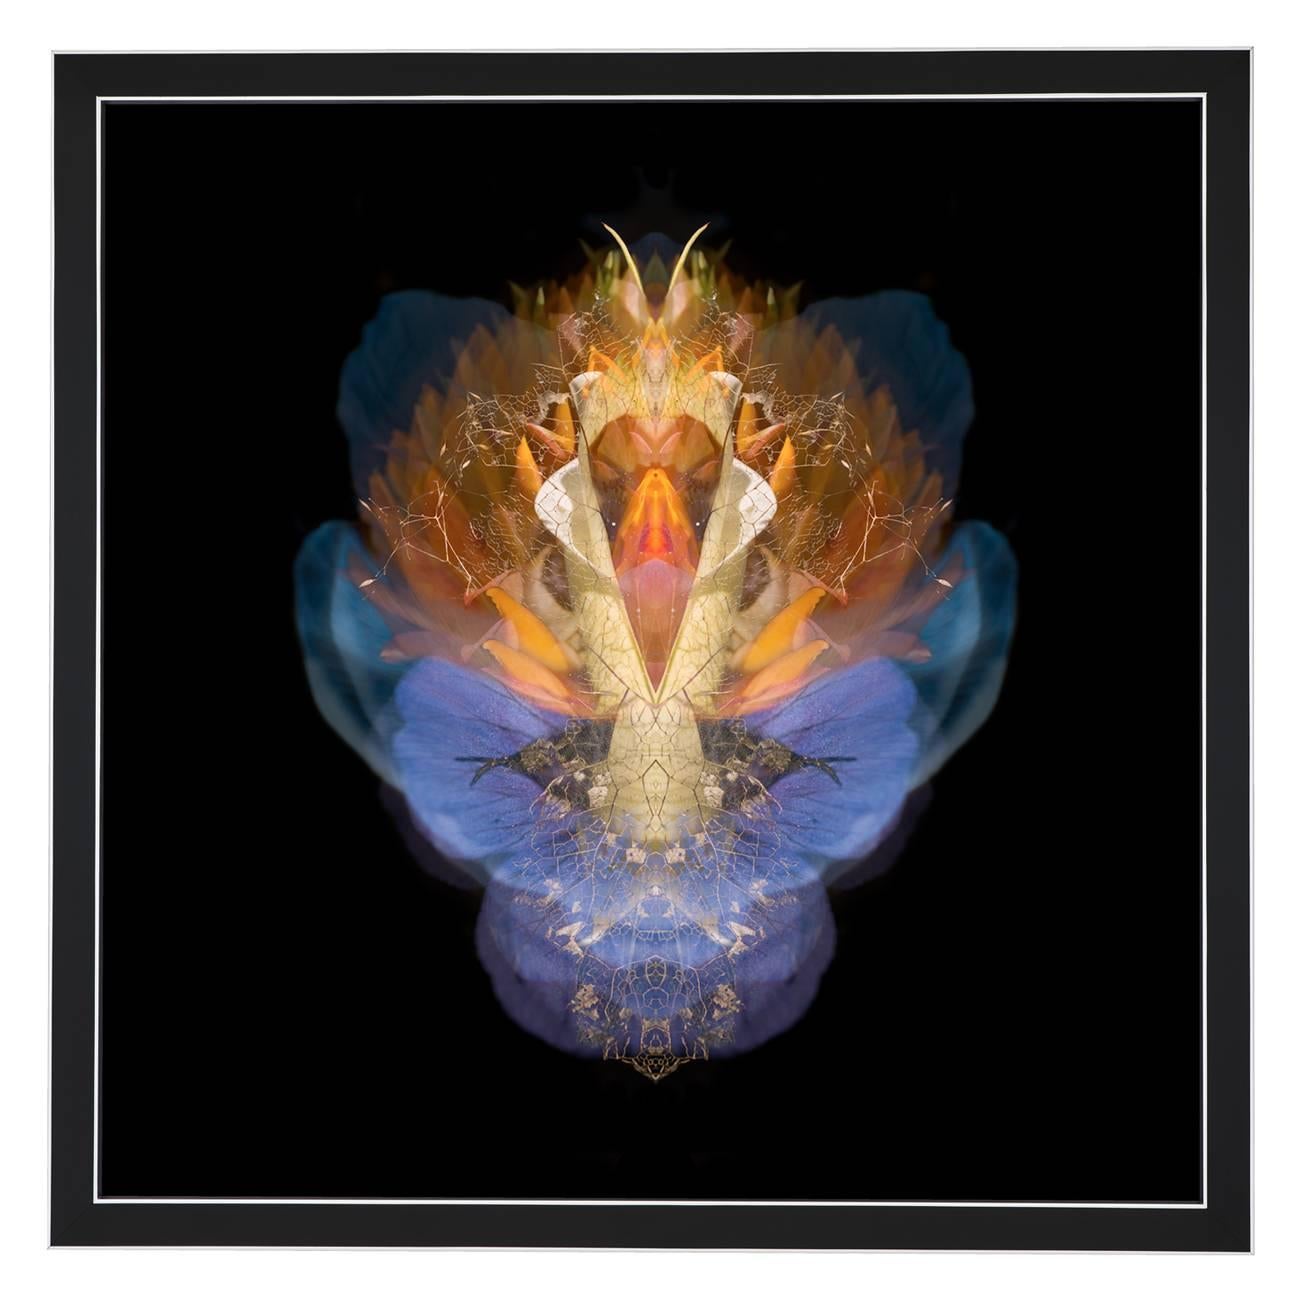 Composition: 
Geranium ‘Rozanne’, Cape Mountain Dhalia, Arum Lily, Himalayan Poppy, Alder Leaf Skeleton.

Limited edition. Each image is uniquely printed directly to 5mm acrylic glass using UV cured pigment inks giving each photograph real depth and